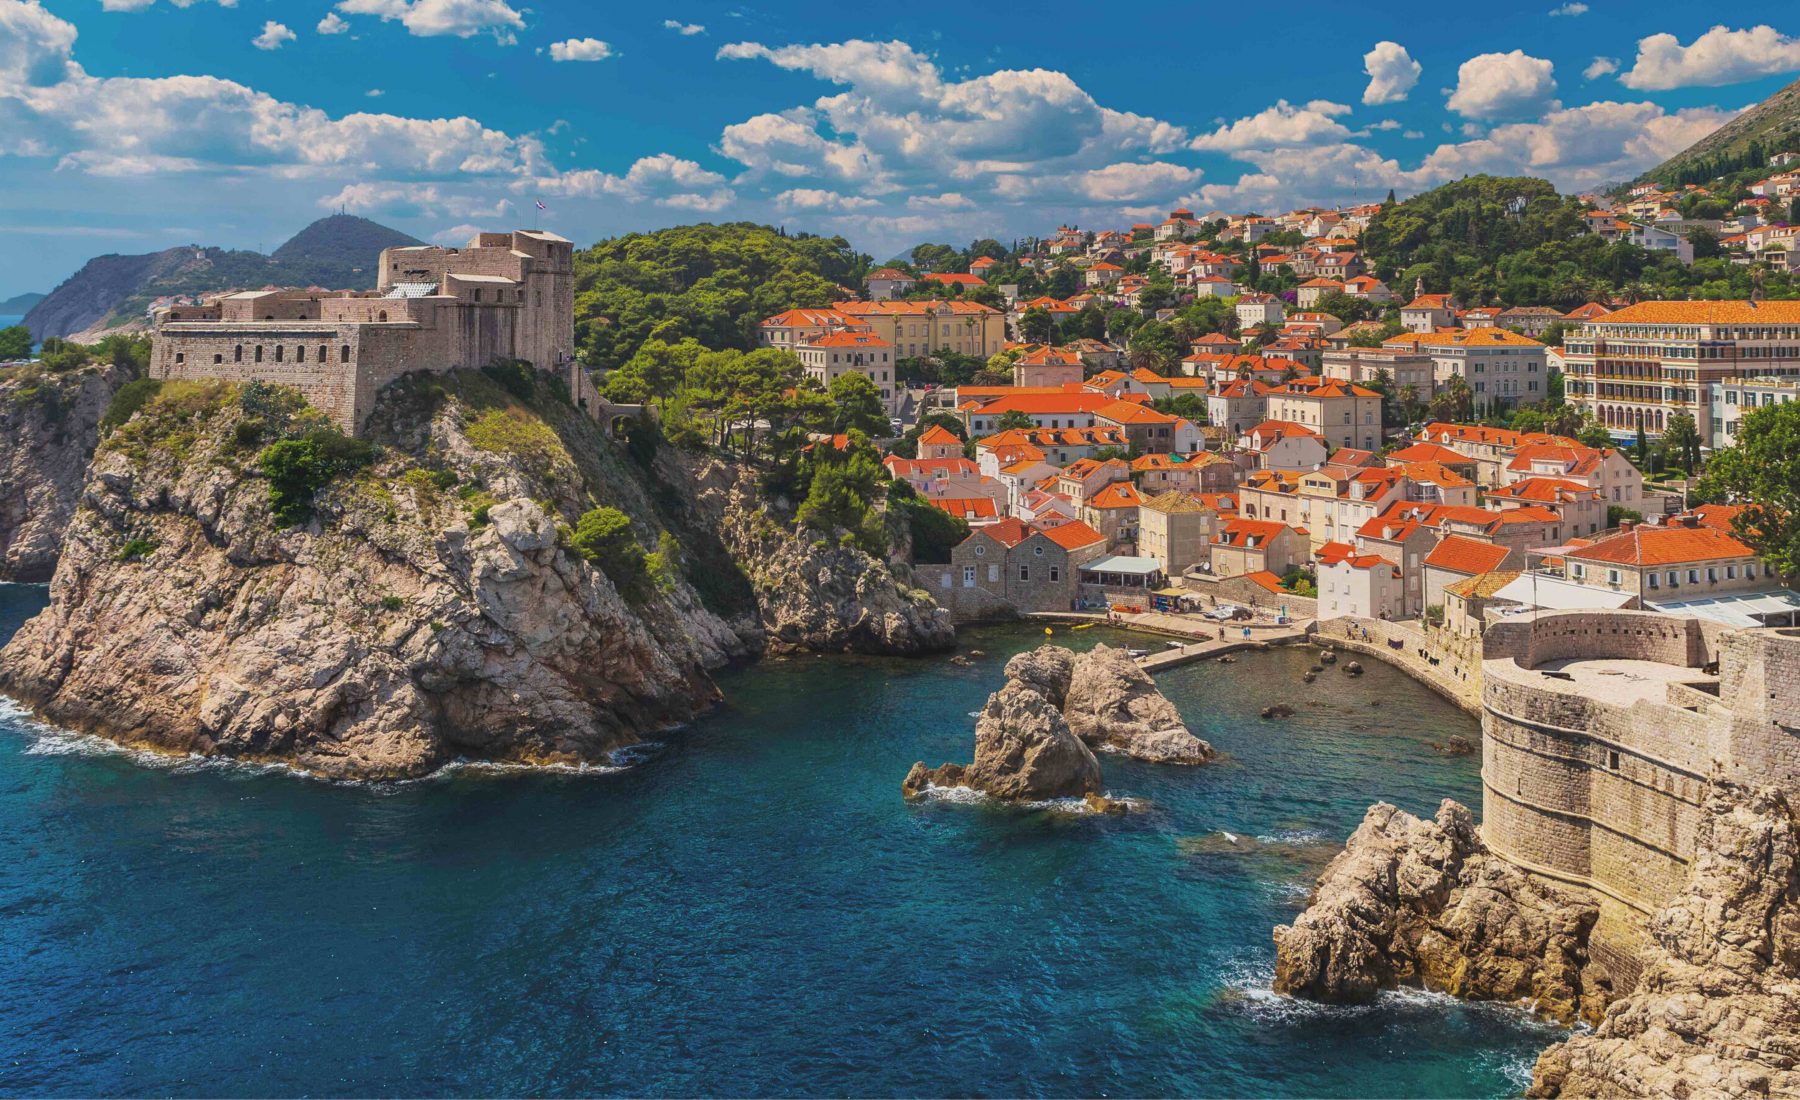 White buildings with orange roofs on a hilly coastline in Croatia. Castles on cliff edges 